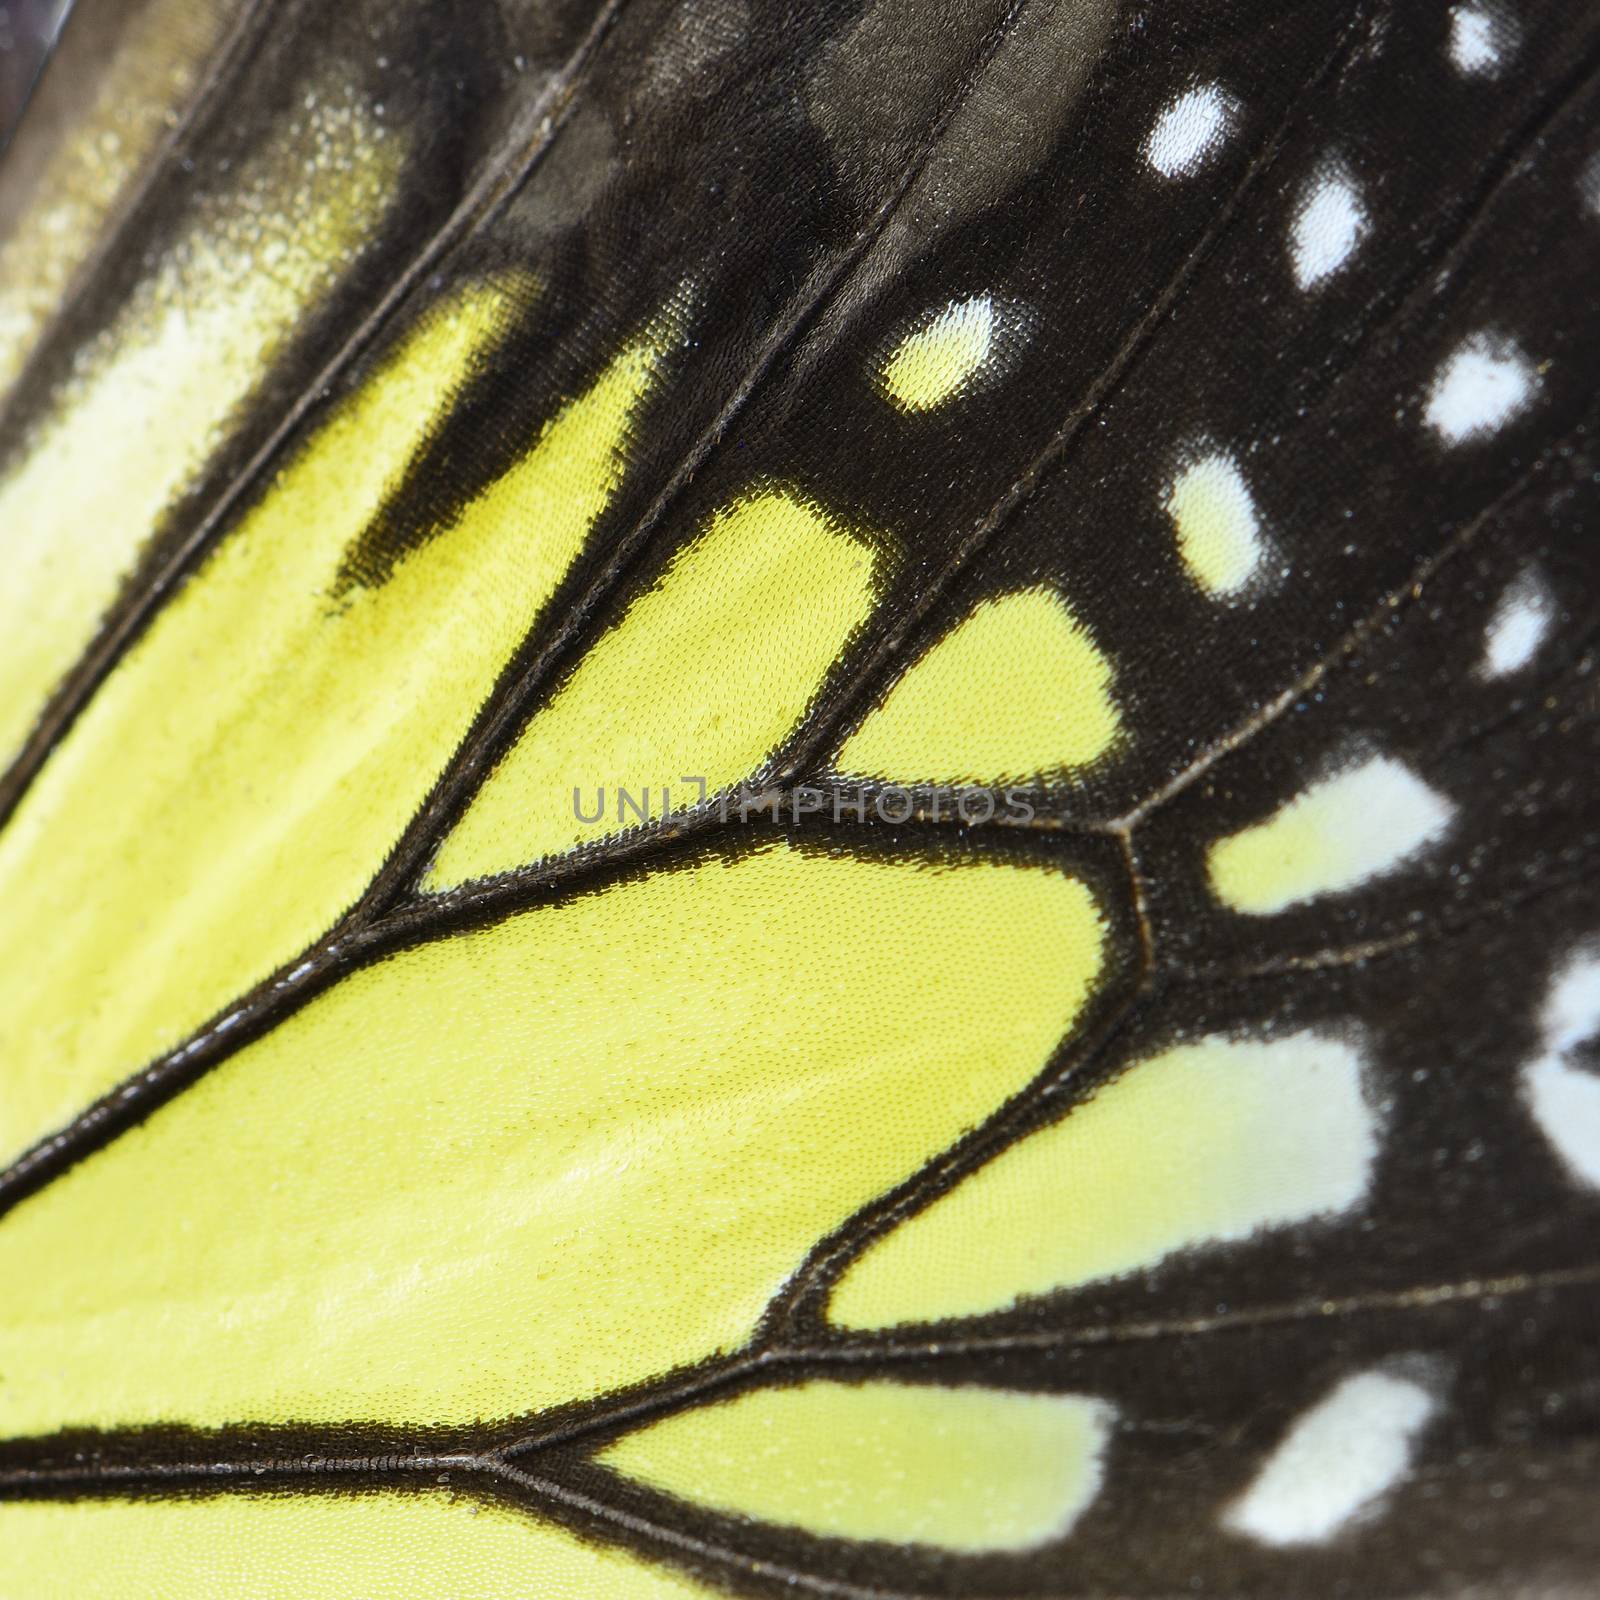 Nature texture, derived from yellow butterfly wing background